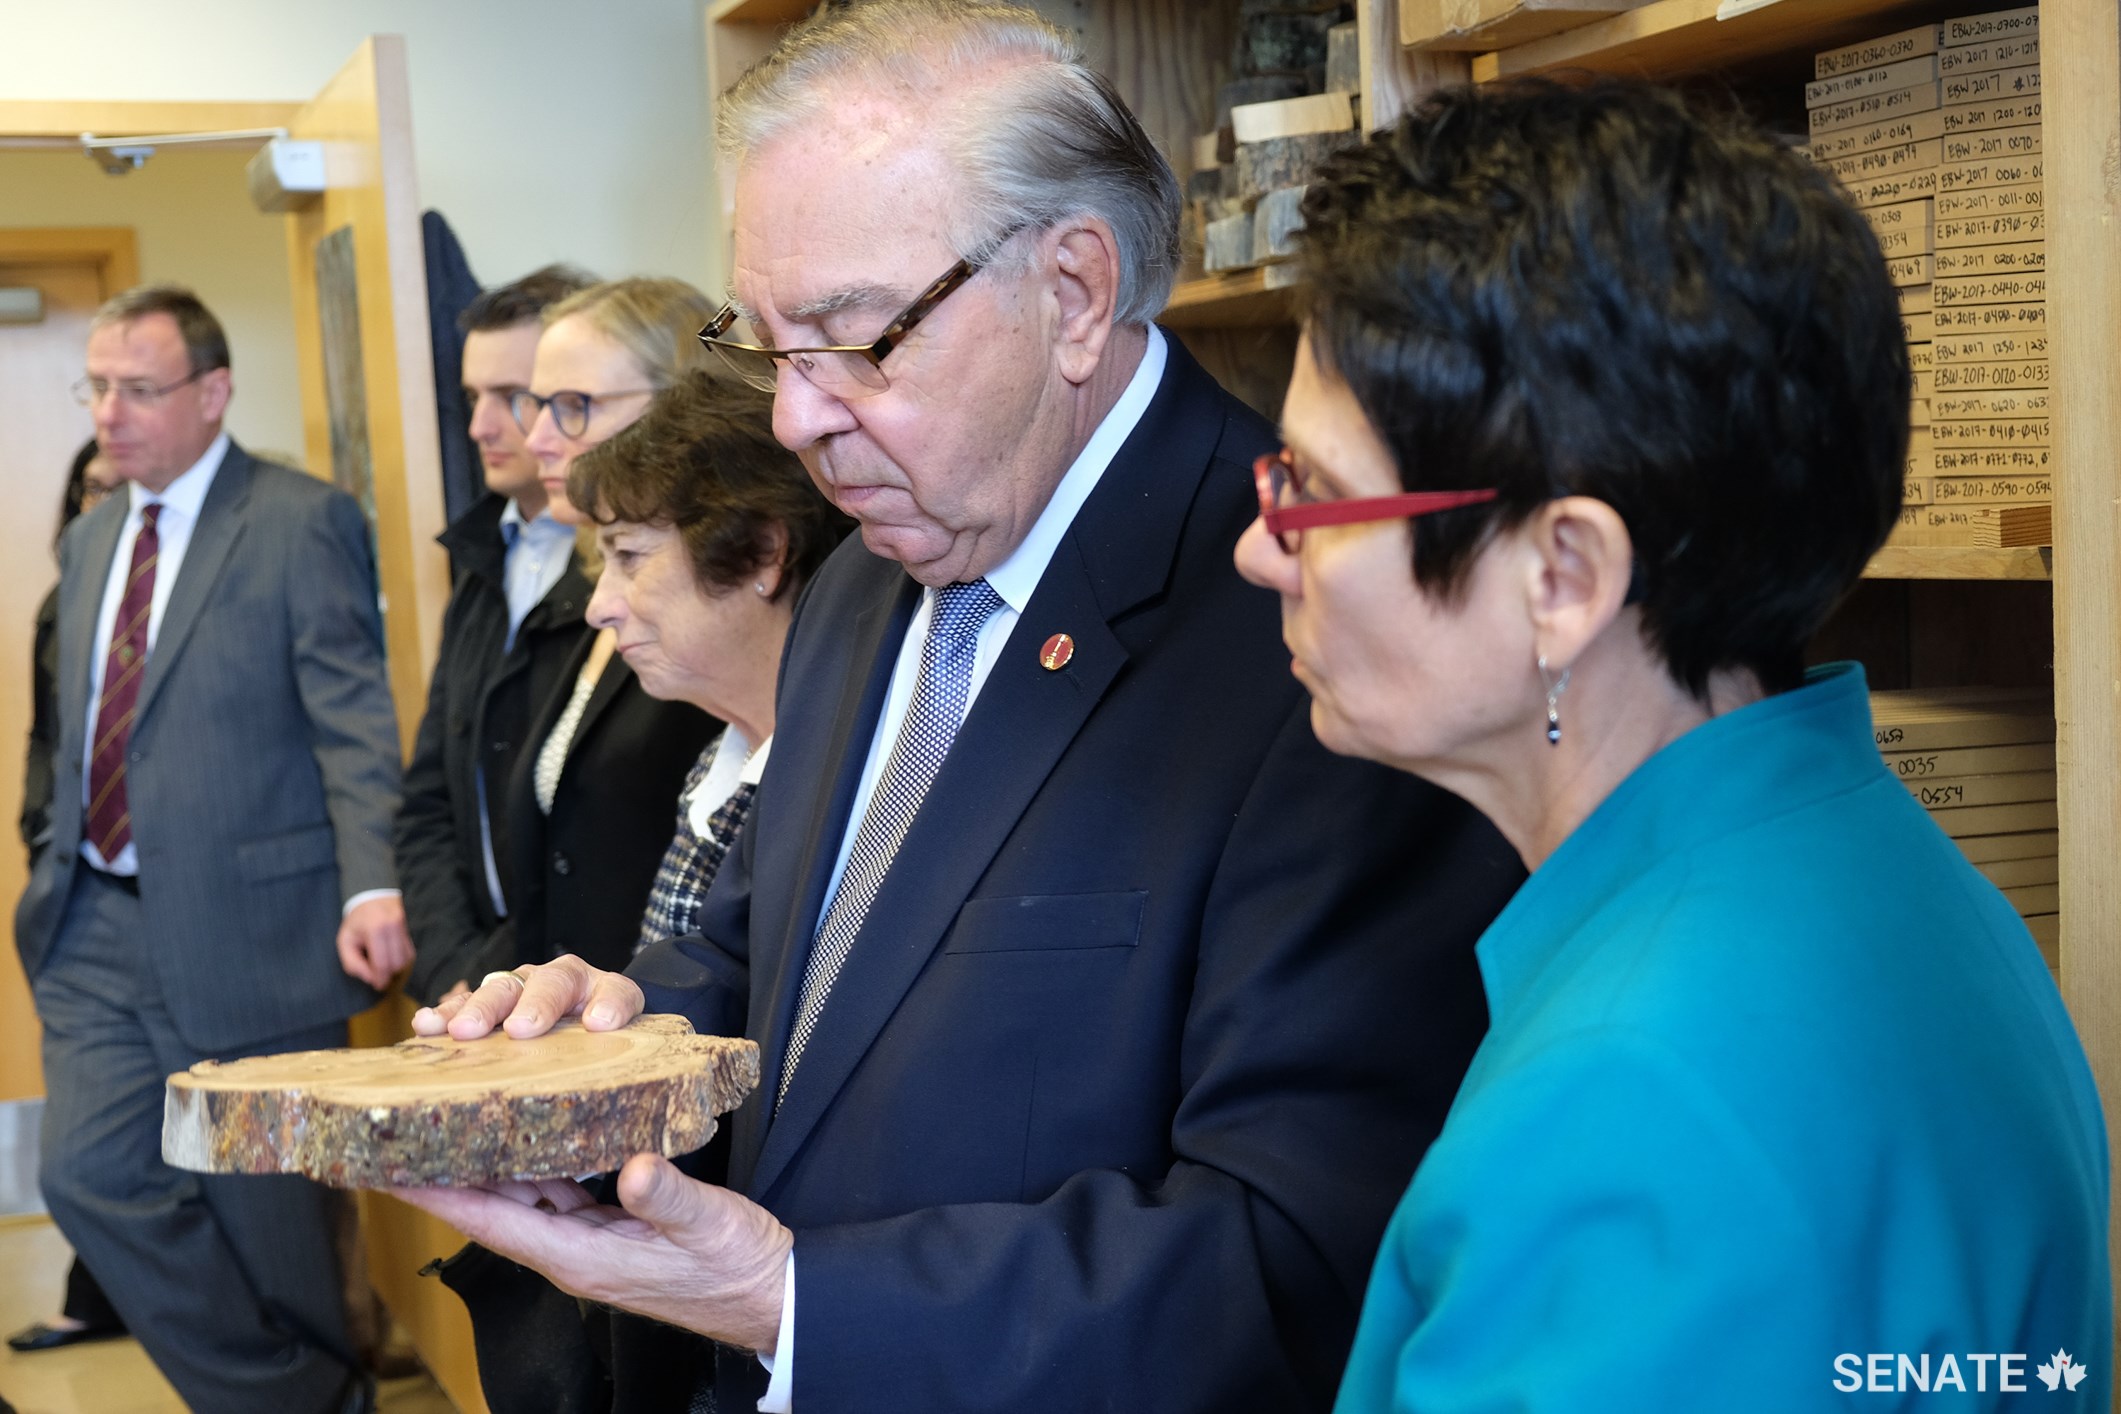 Senator Ghislain Maltais examines a damaged tree sample, while senators Raymonde Gagné and Diane F. Griffin learn about the impact of climate change on forest fire patterns over time.